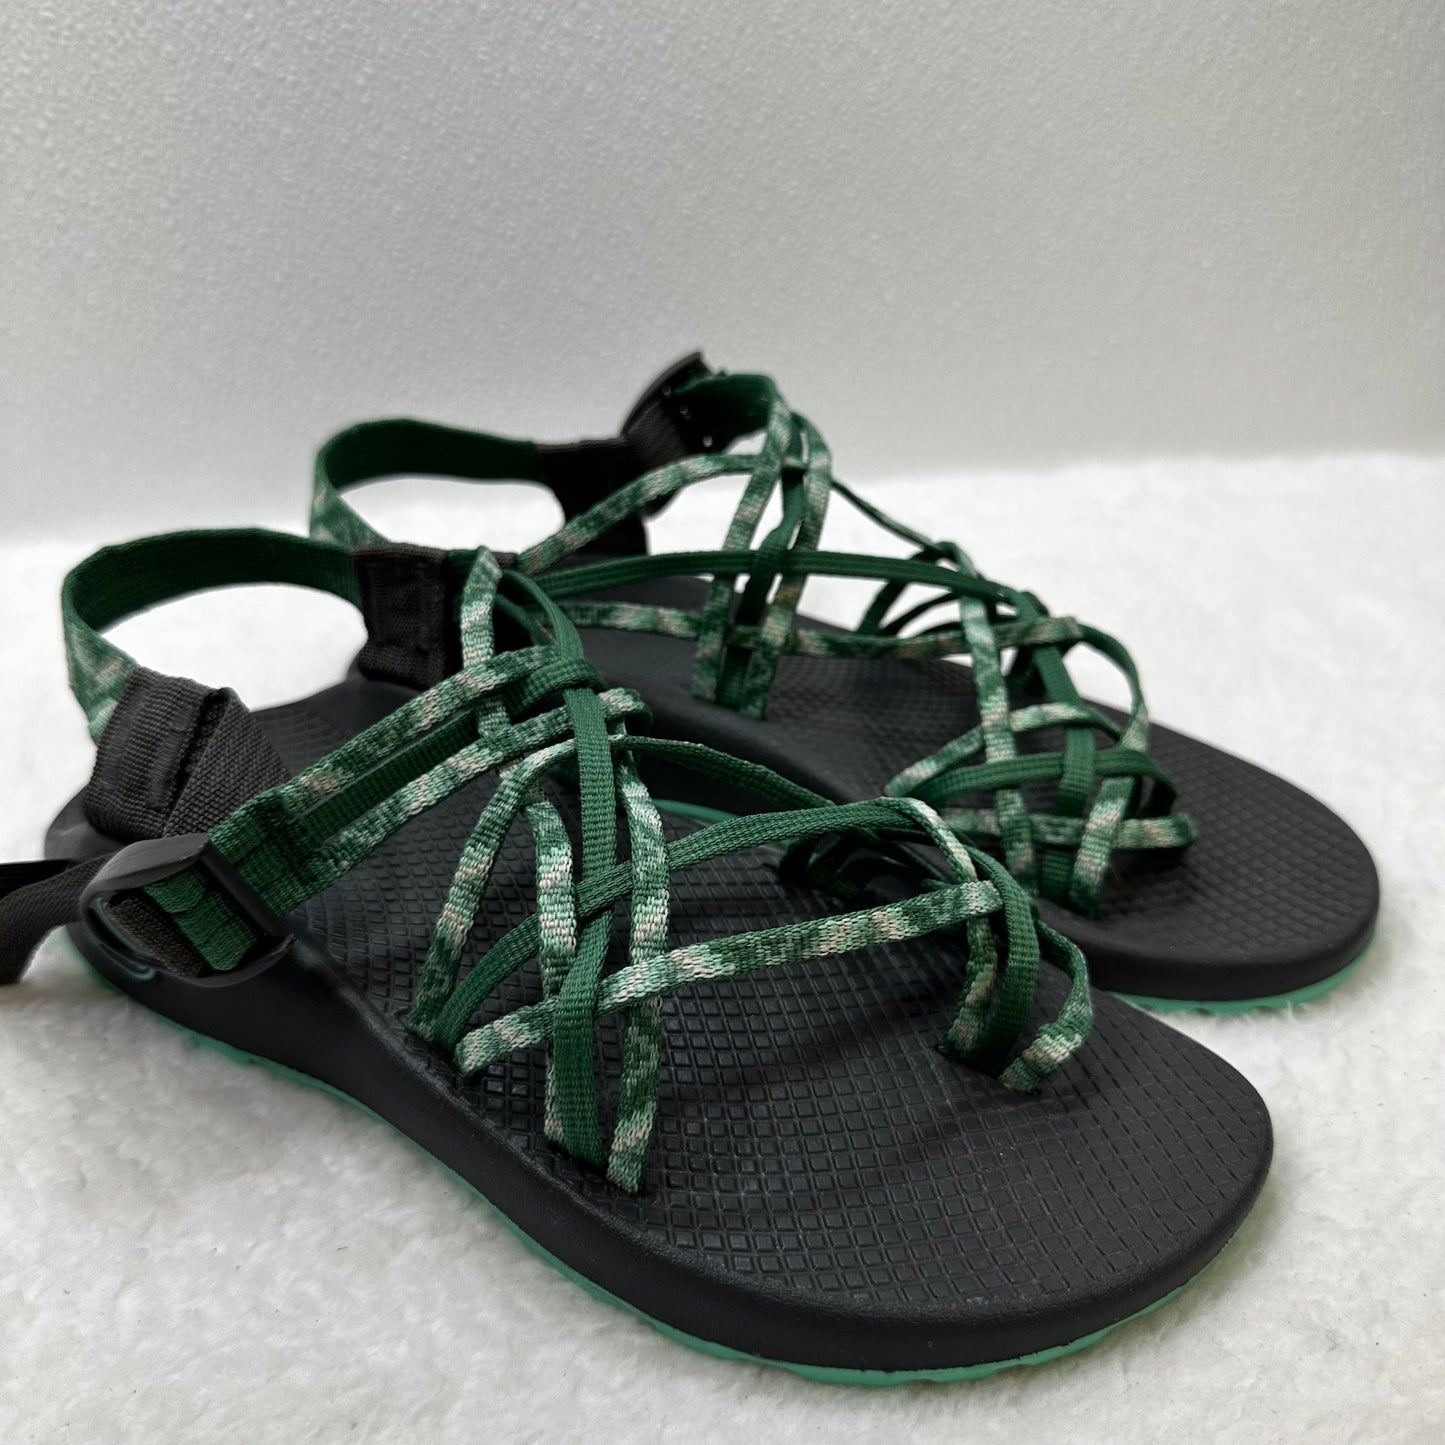 Sandals Flats Chacos, Size 9